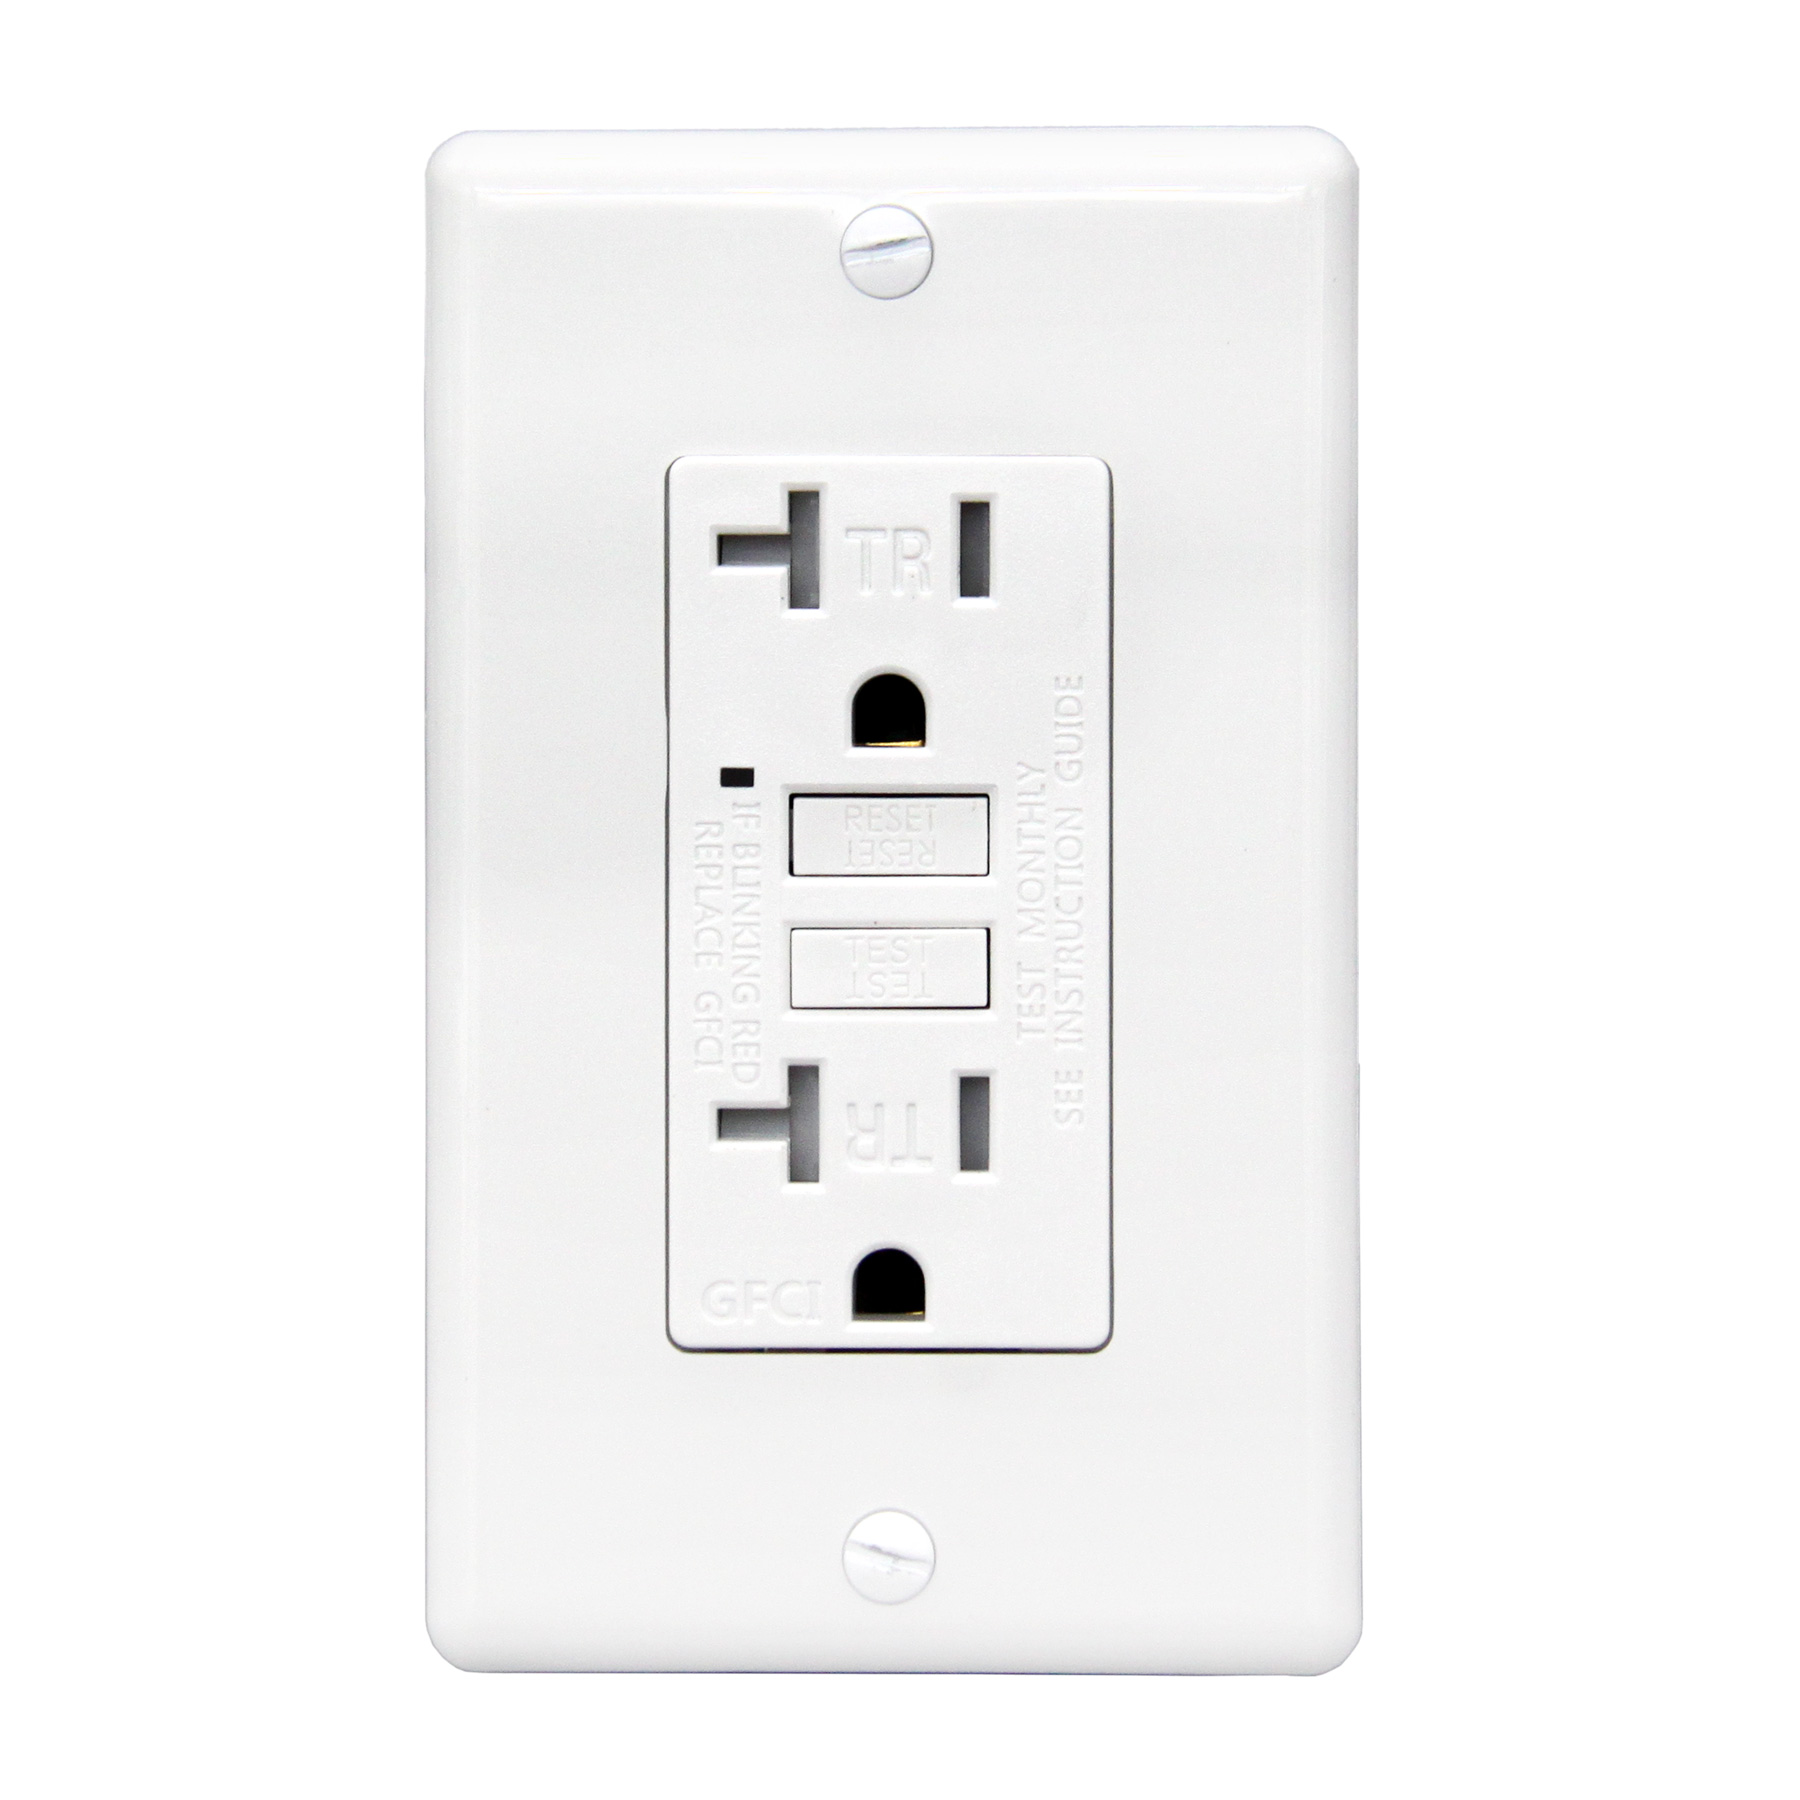 Faith UL Listed 20 Amp Self-Test GfCI Tamper Resistant Electrical GFCI Duplex Receptacle With Wall Plate